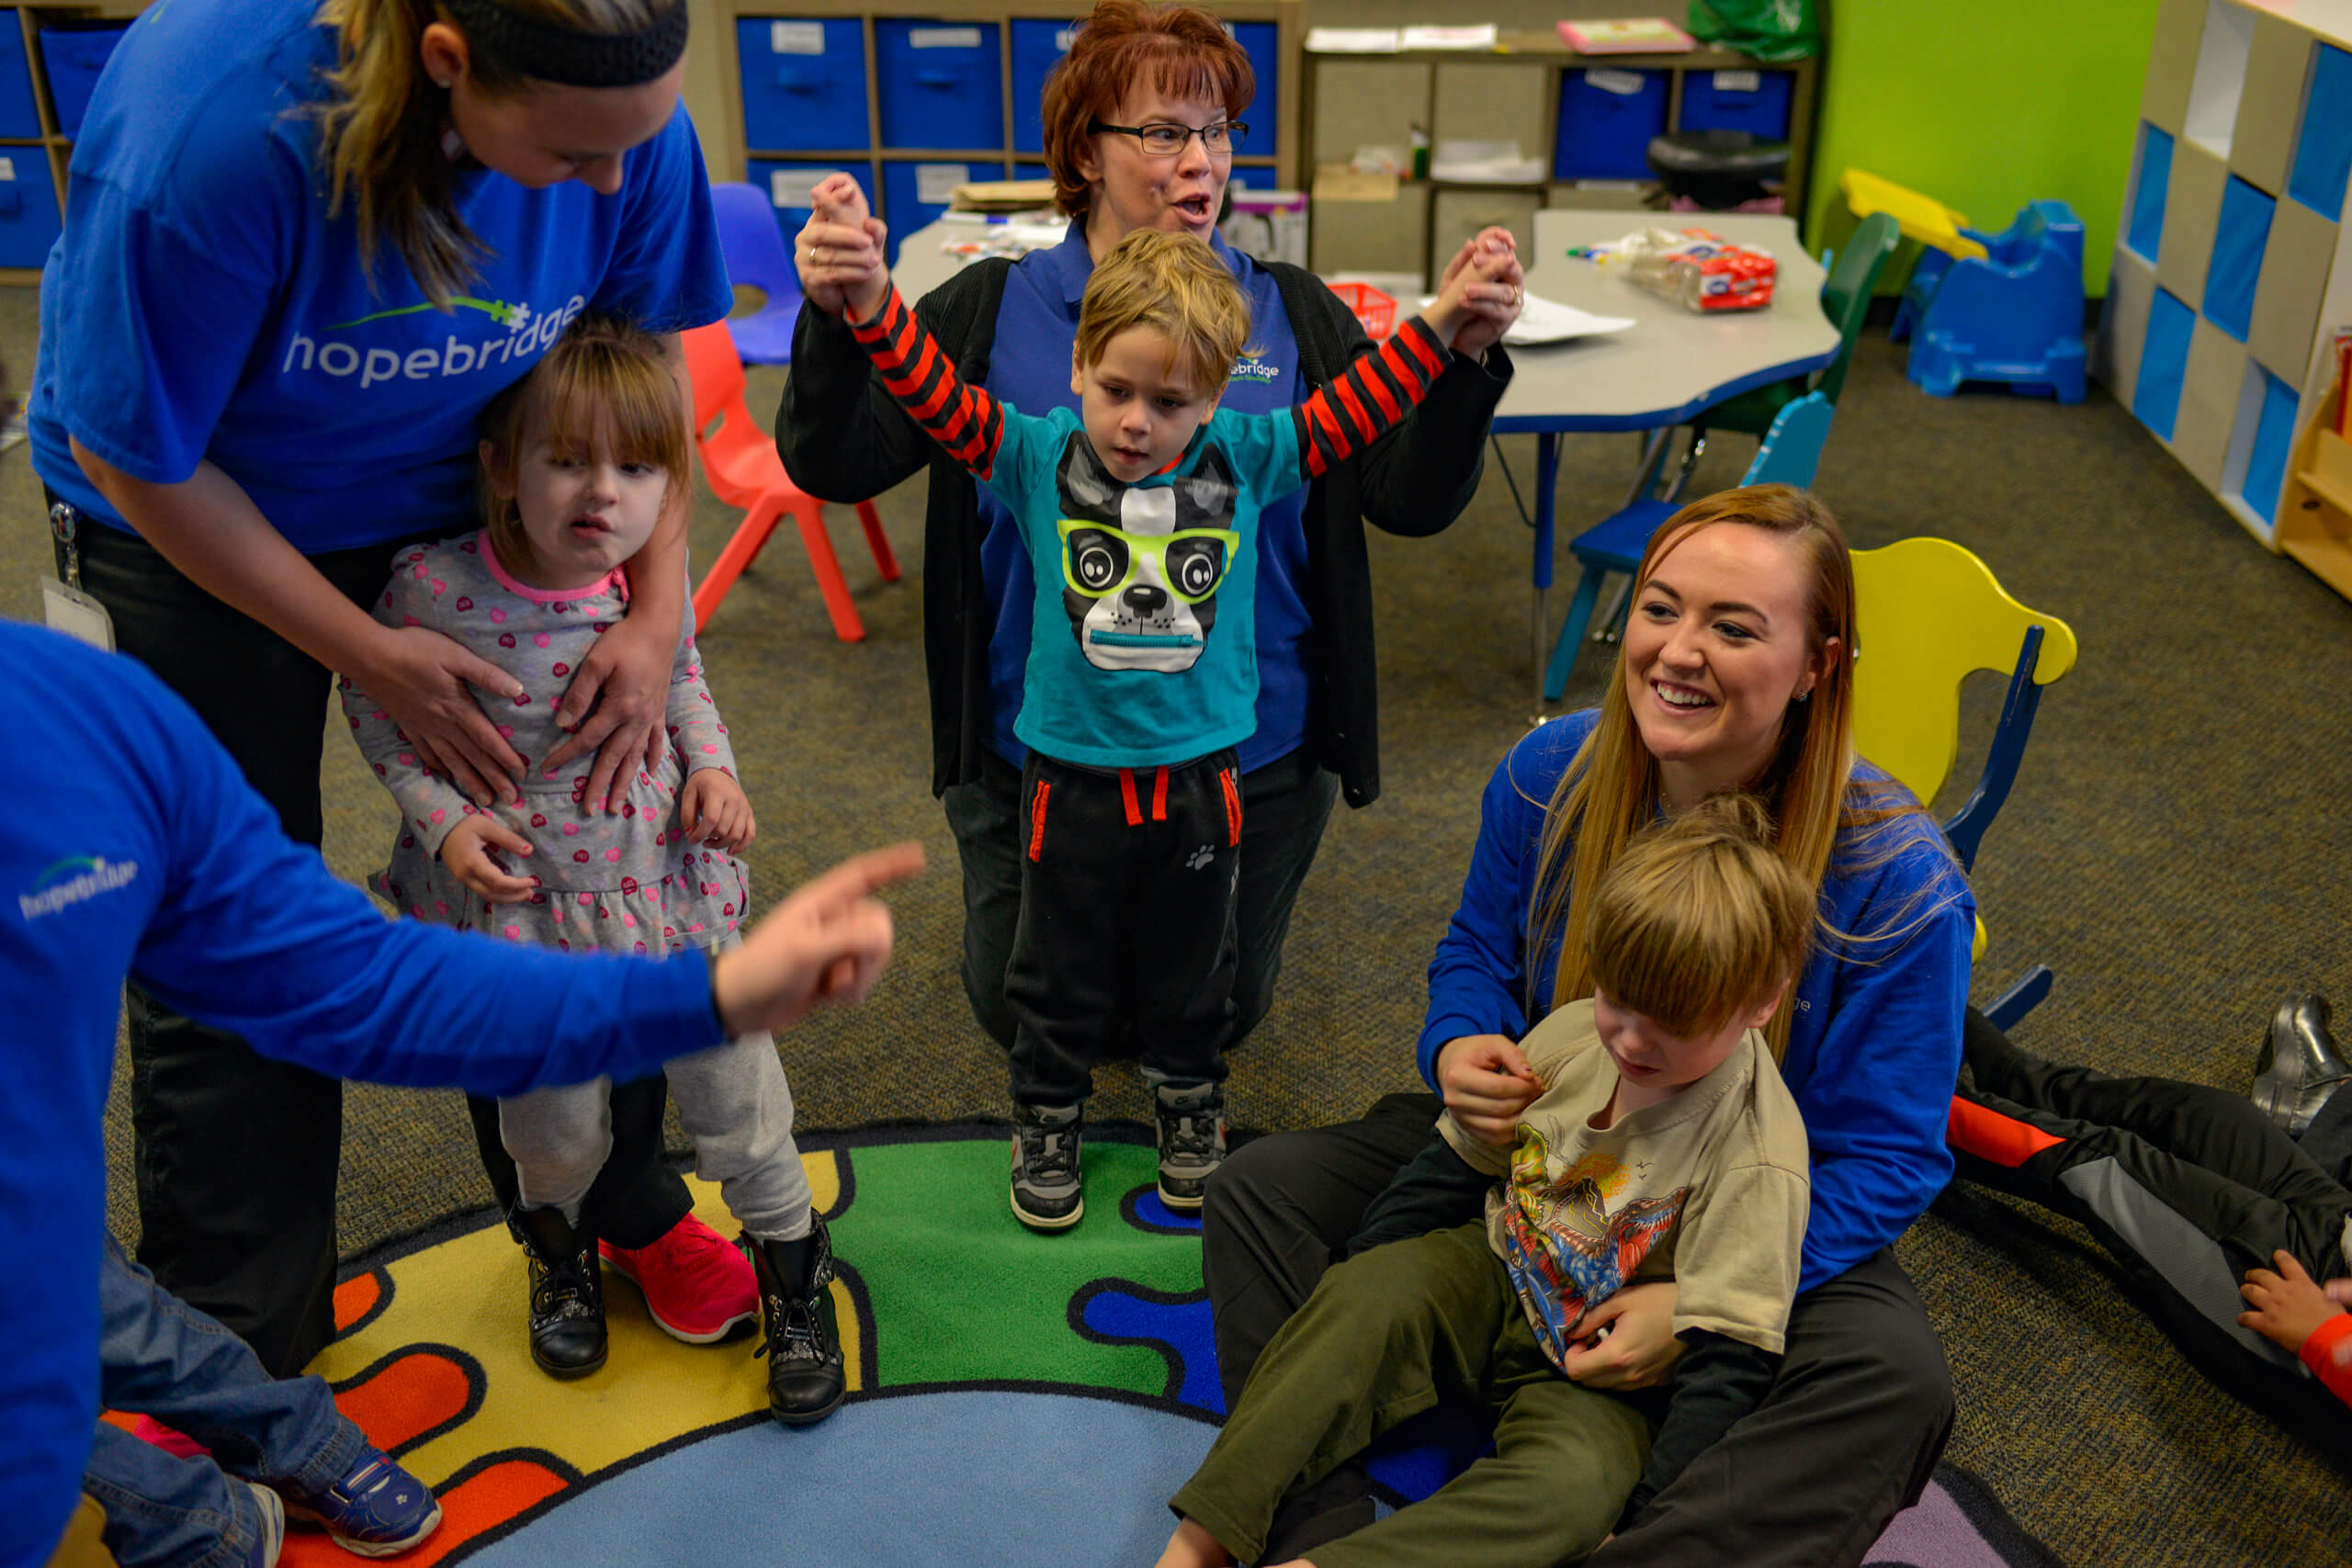 Hopebridge children and therapists participating in circle time at the autism therapy center.